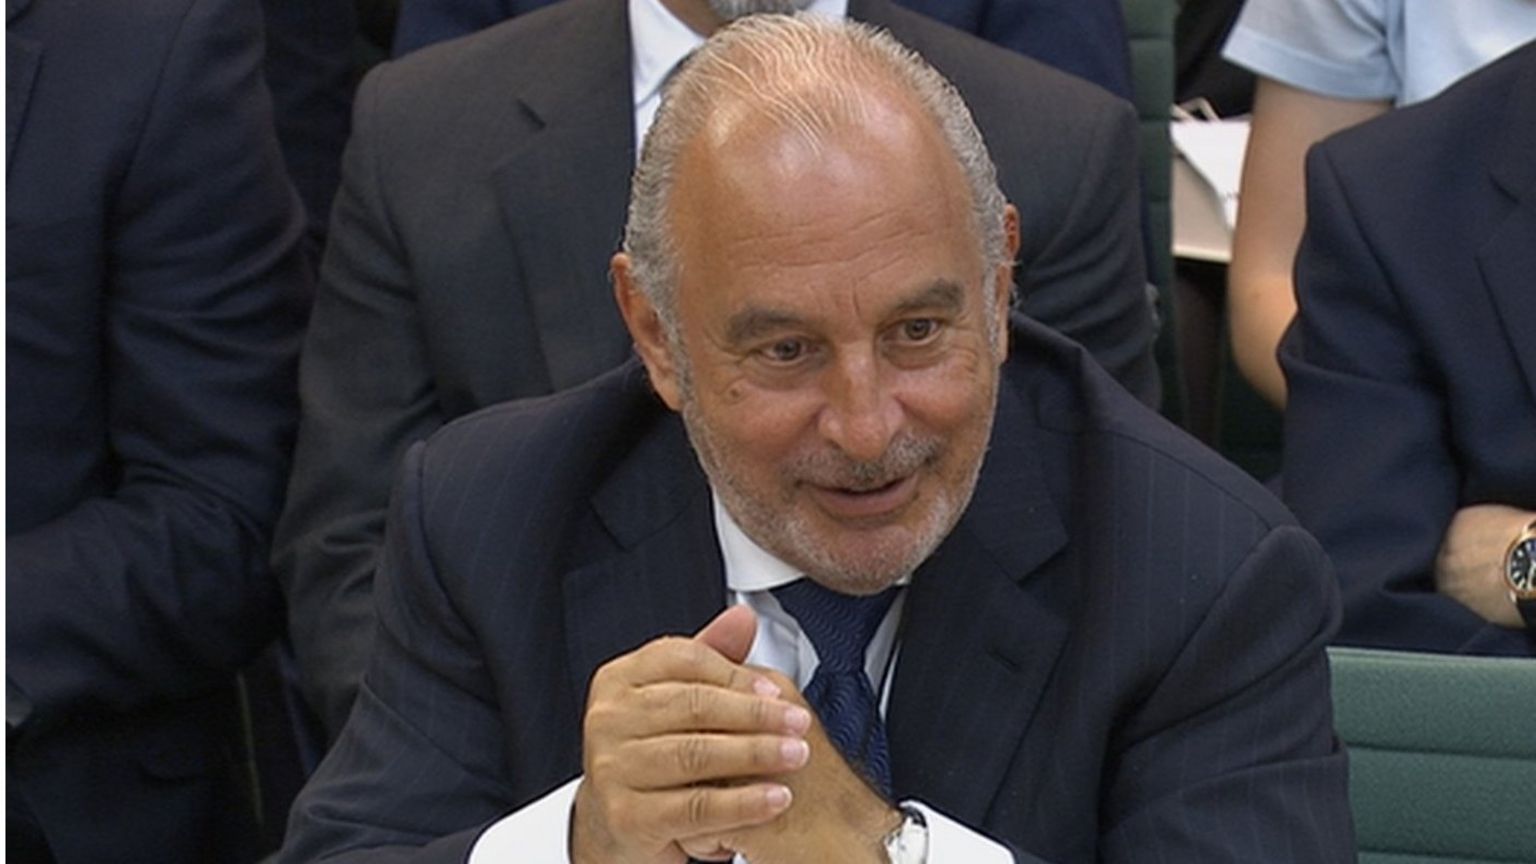 Sir Philip Green gives evidence to the Business, Innovation and Skills Committee and Work and Pensions Committee at Portcullis House, London, on the collapse of BHS. Picture date: Wednesday June 15, 2016